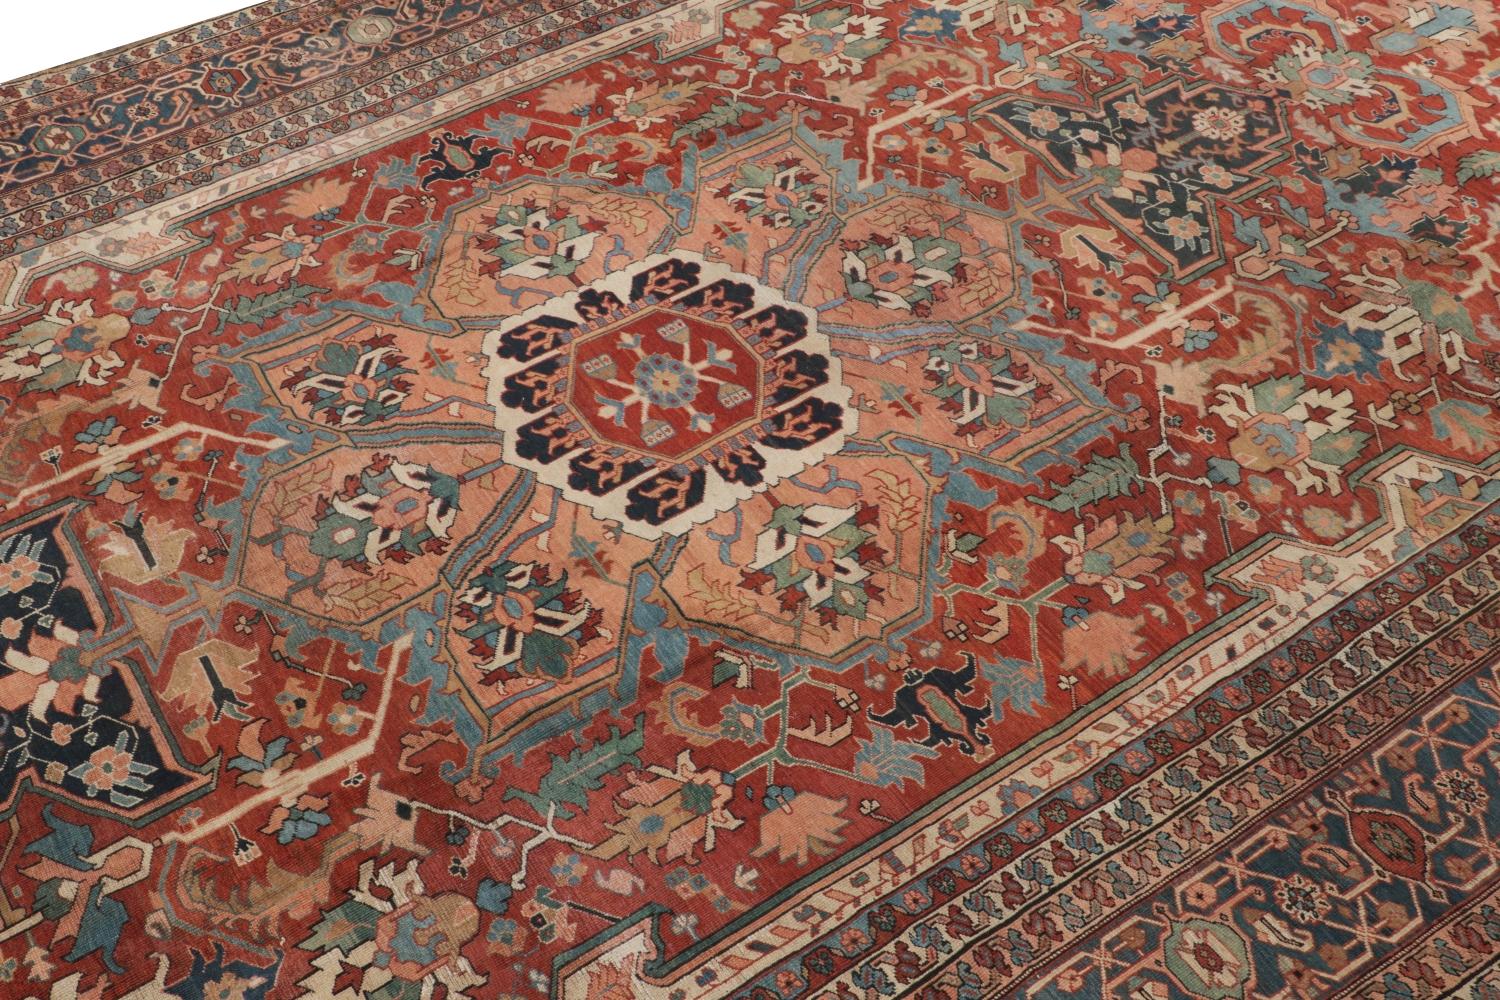 This antique 13x23 Persian rug is an exceptionally rare palace-sized carpet of Heriz provenance—hand-knotted in wool circa 1900-1910.

On the Design:

Connoisseurs will note Heriz rugs are among the most coveted Persian lineage, with few